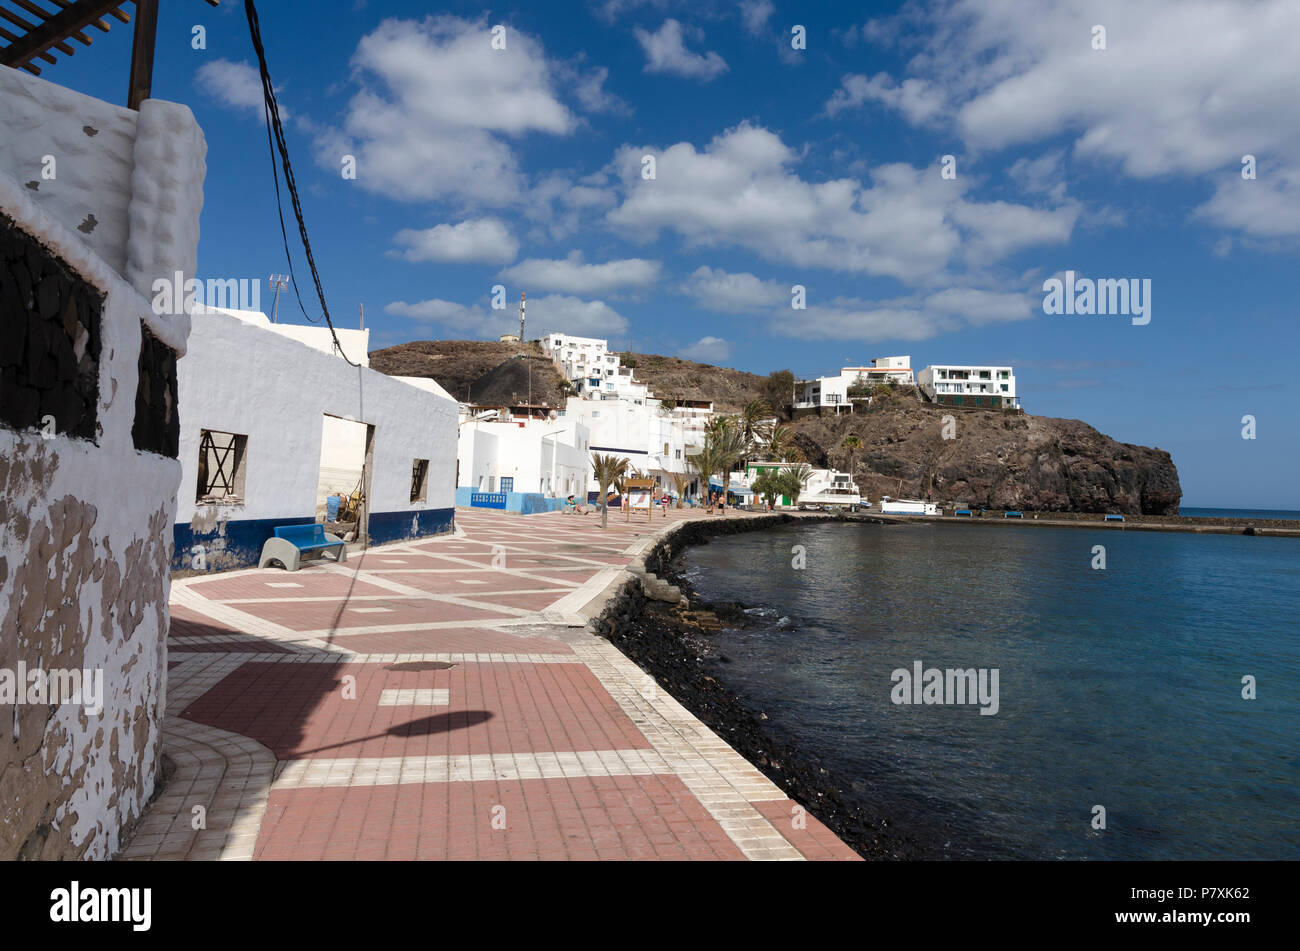 Las Playitas, Fuerteventura, Canary Islands, Spain: May 17, 2018: The view  of a deserted old town in Las Playitas resort with a beachfront promeande  Stock Photo - Alamy